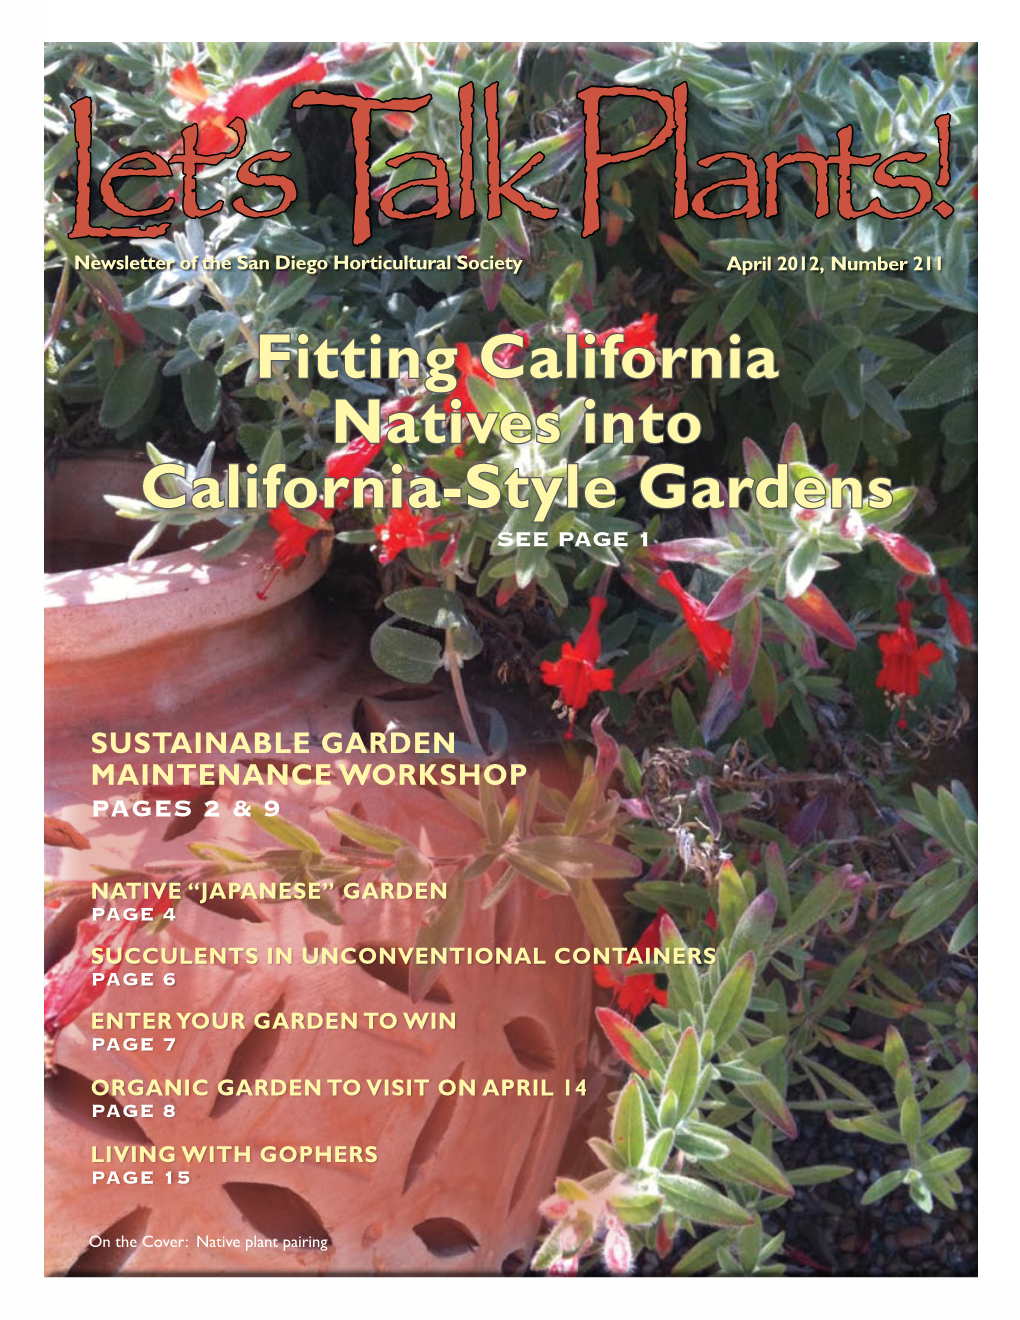 Fitting California Natives Into California-Style Gardens See Page 1